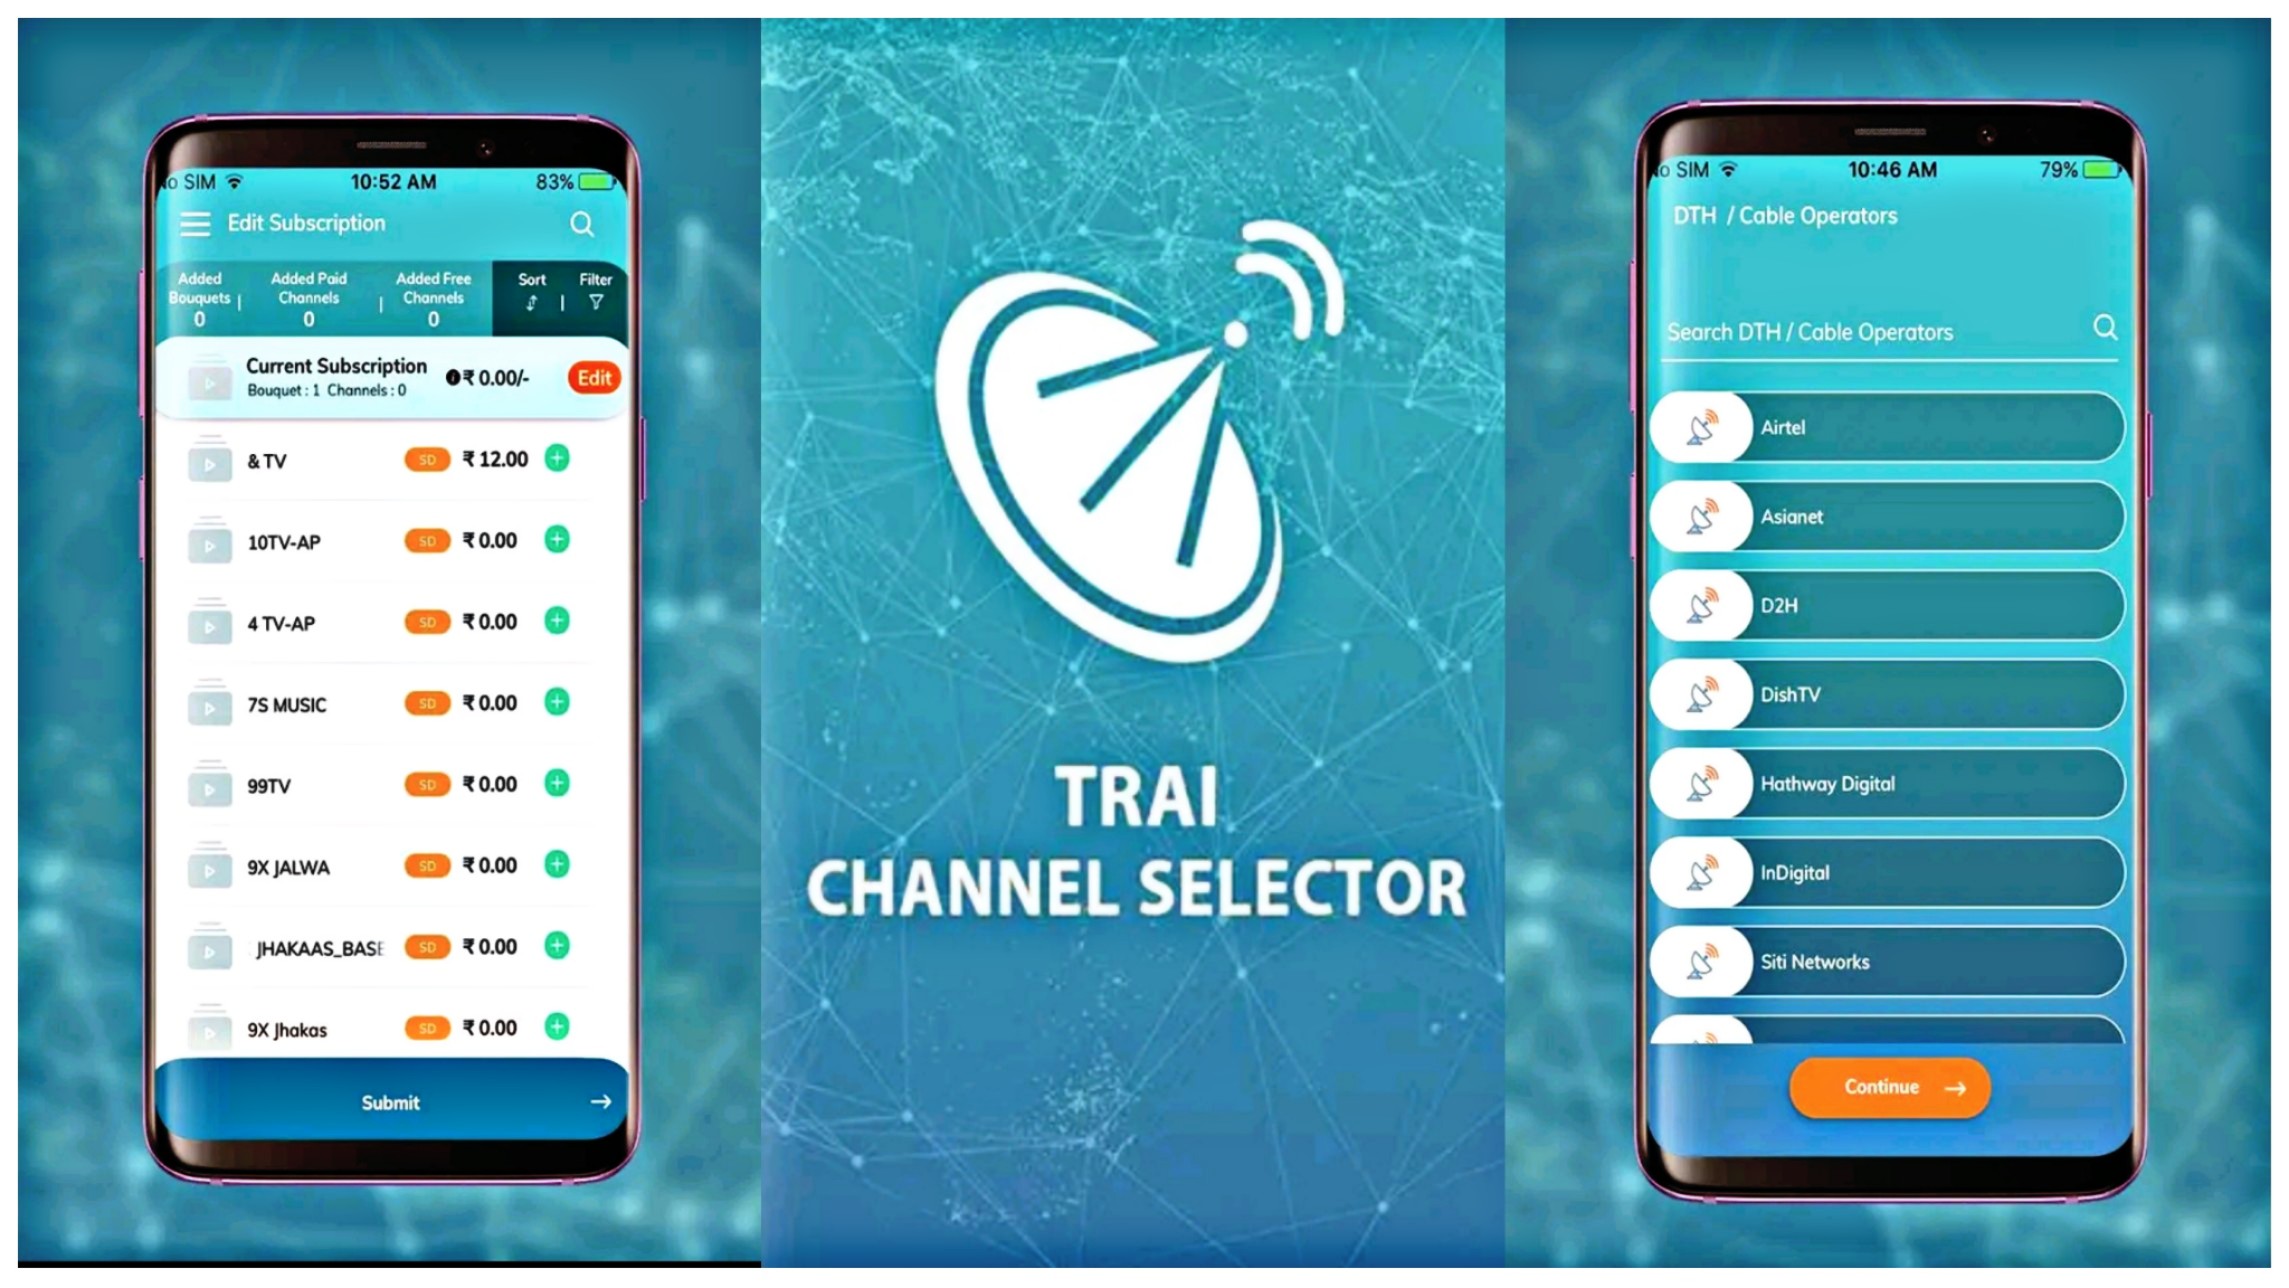 TRAI Channel Selector App Released for Easy Cable Subscription/ DTH Modification